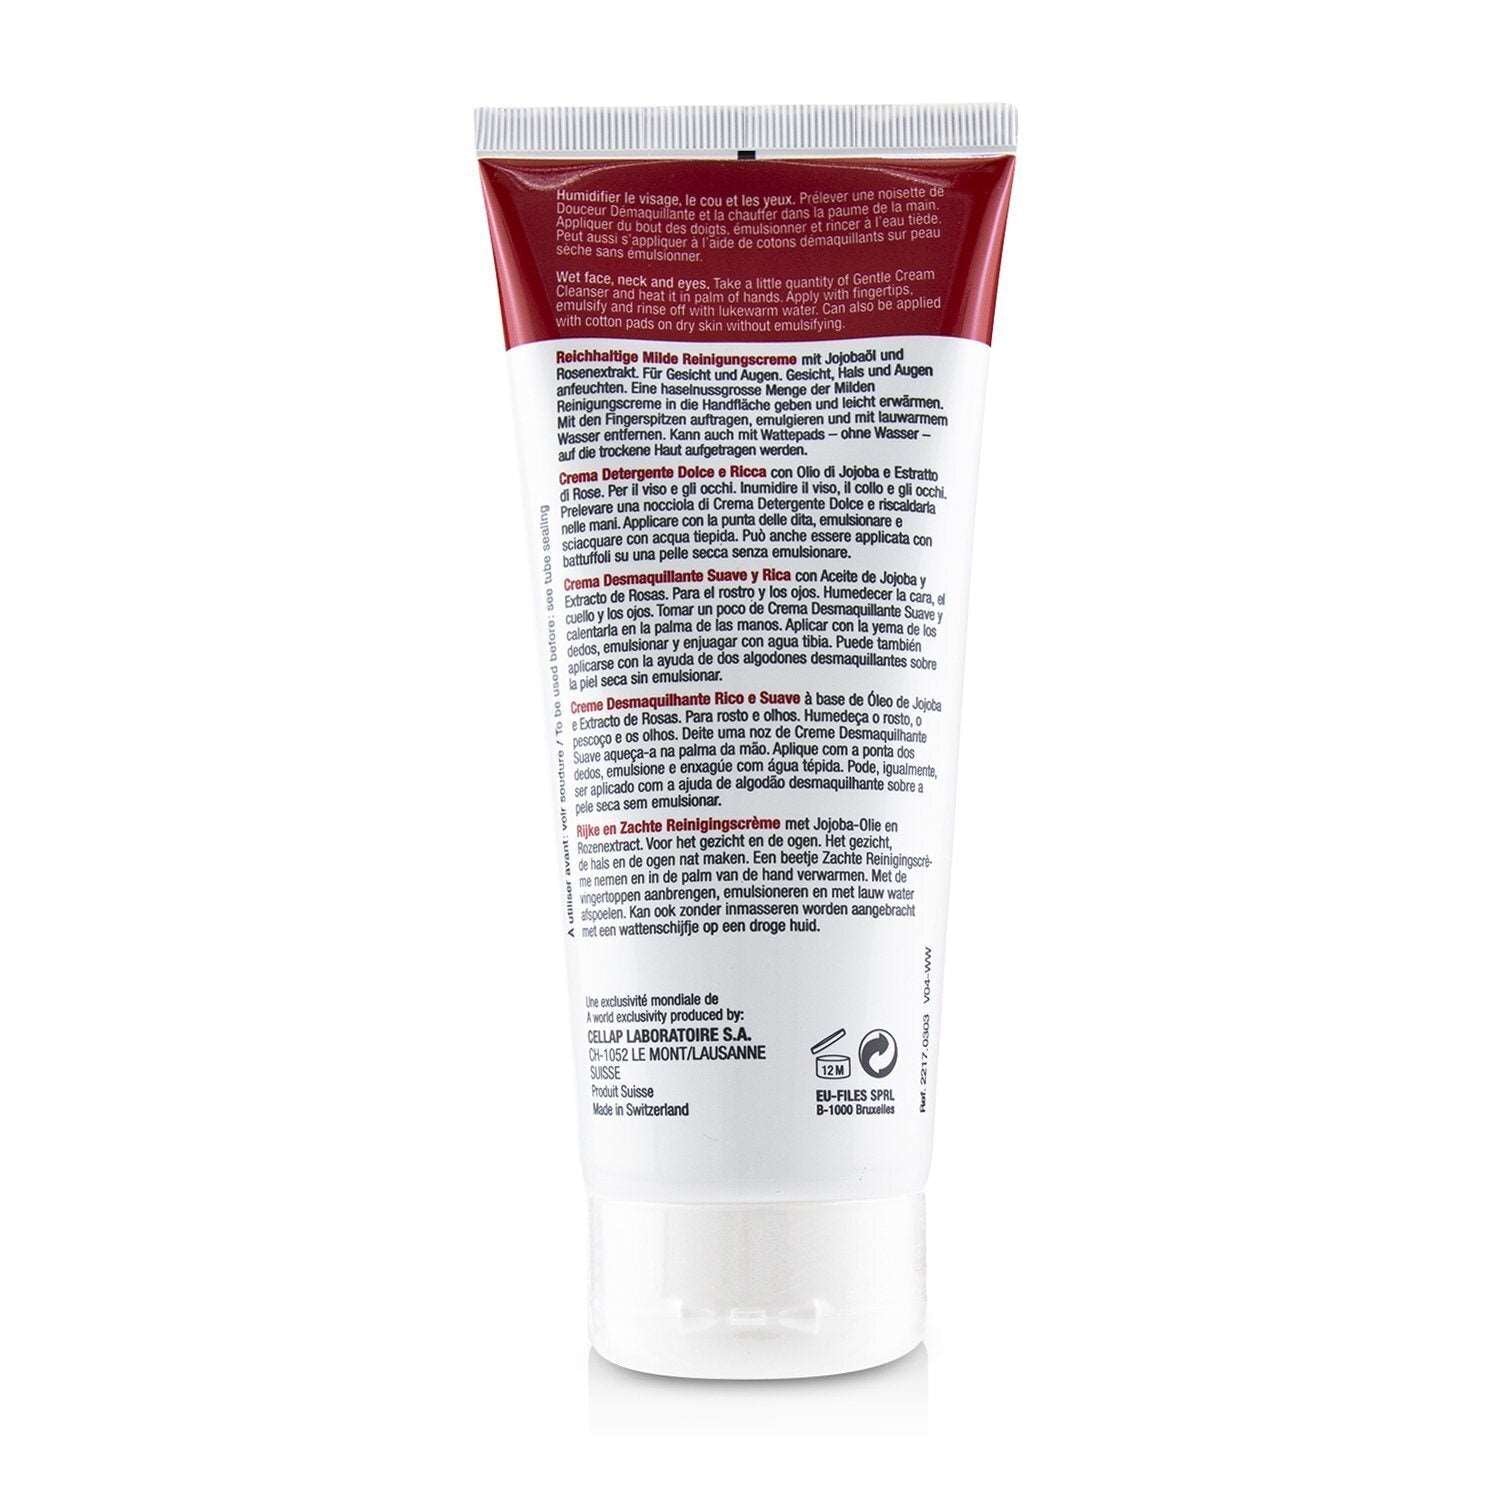 Cellcosmet Gentle Cream Cleanser (Rich & Soft Make-Up Remover Cream) 3P's Inclusive Beauty